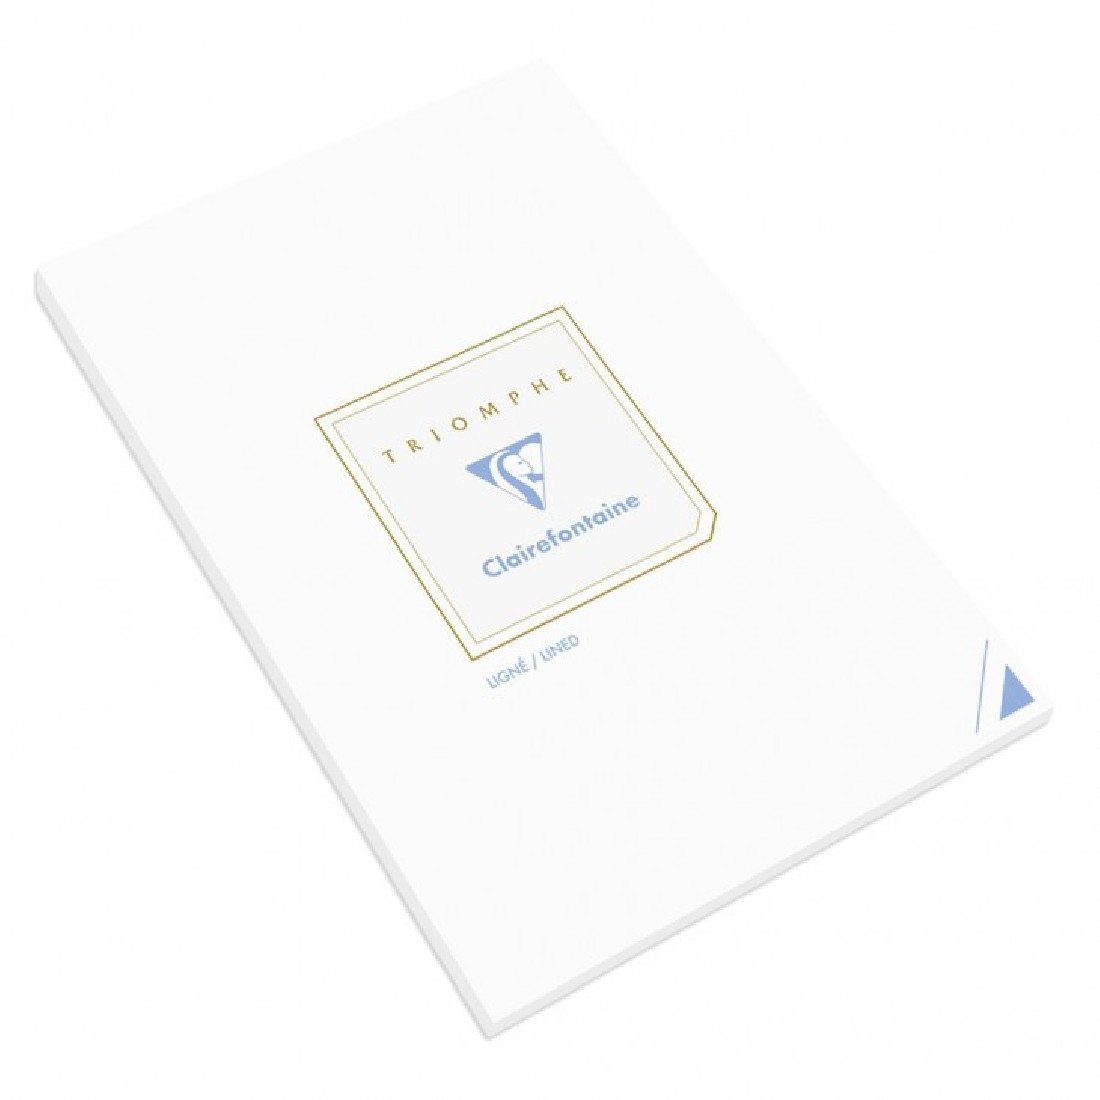 Clairefontaine Rhodia Triomphe pad A4, 29,7X21, 100 pages, white paper 90g, Lined, 6174c